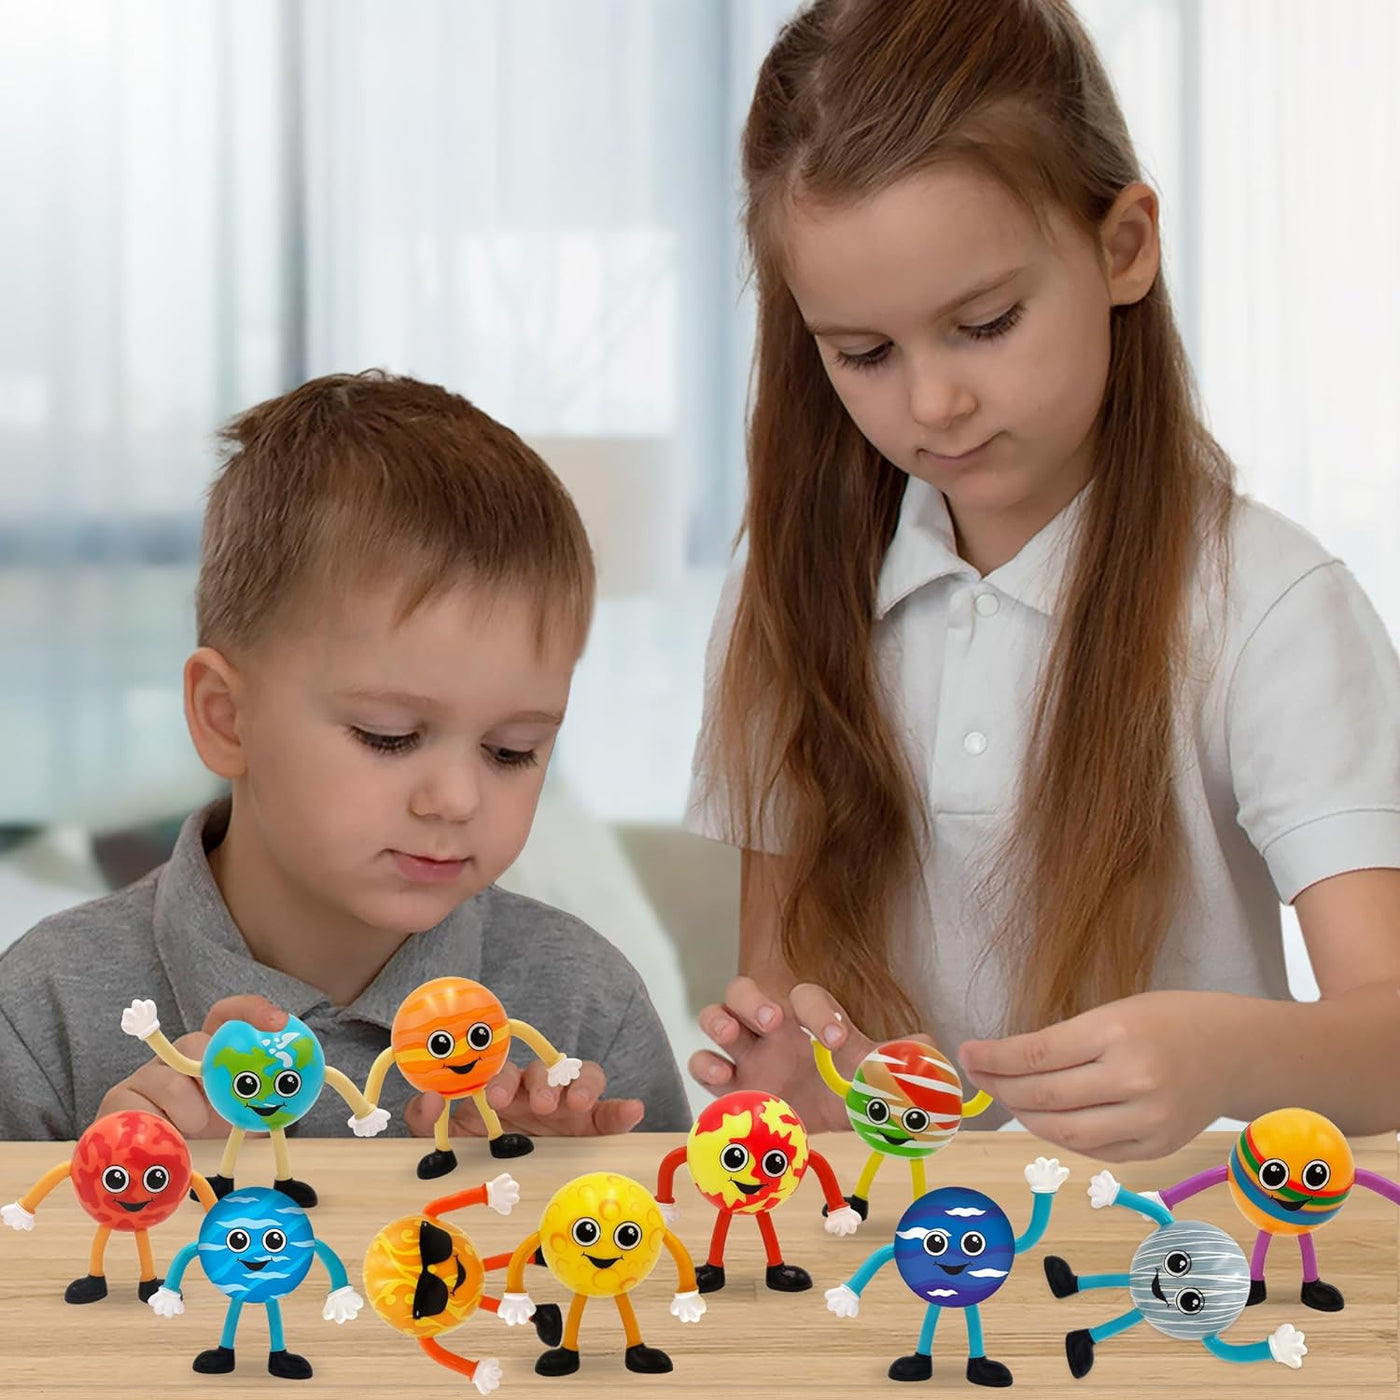 Solar System Educational Toys for Kids, 2.75" Bendable Planet Figurines -  Space Toy for Kids (9 figurines)